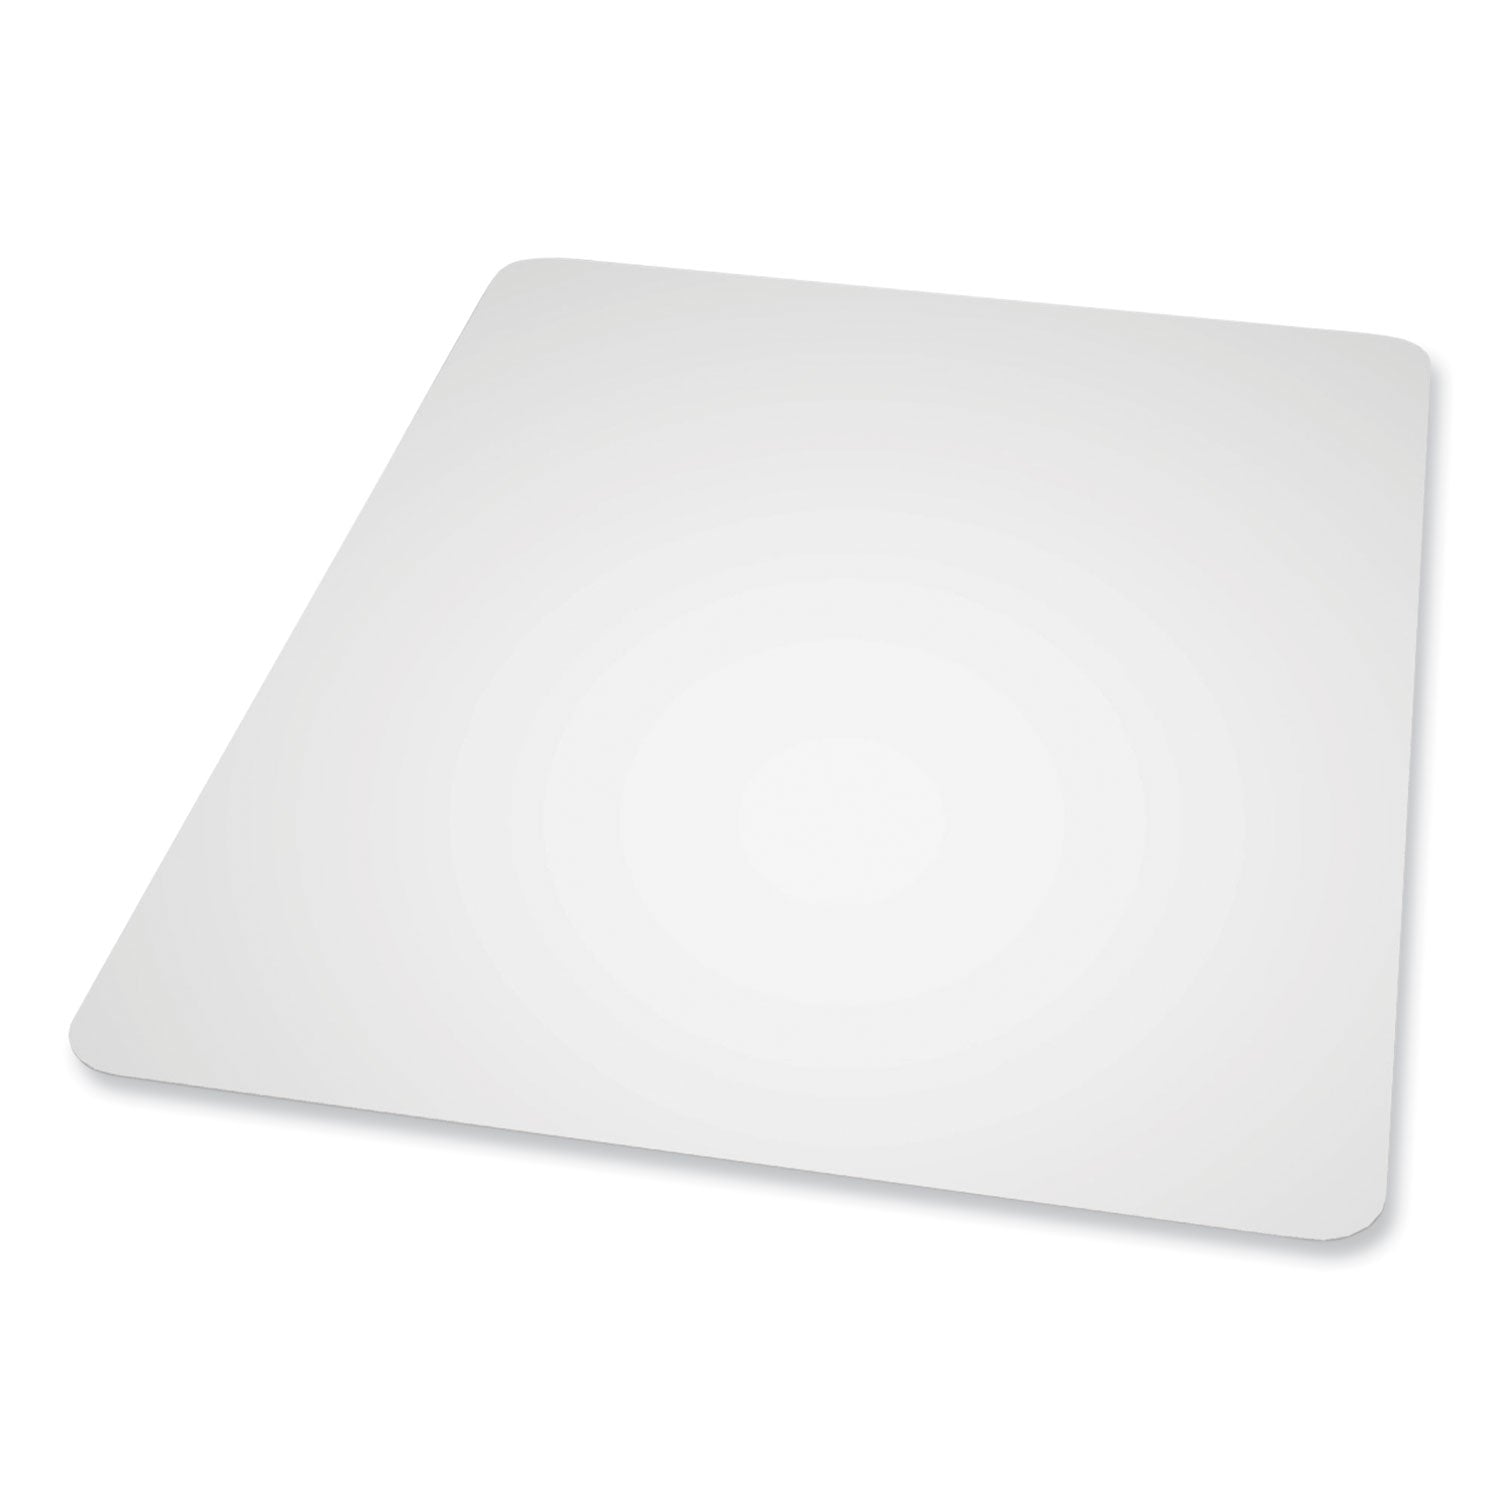 everlife-chair-mat-for-hard-floors-heavy-use-rectangular-60-x-72-clear-ships-in-4-6-business-days_esr132731 - 1